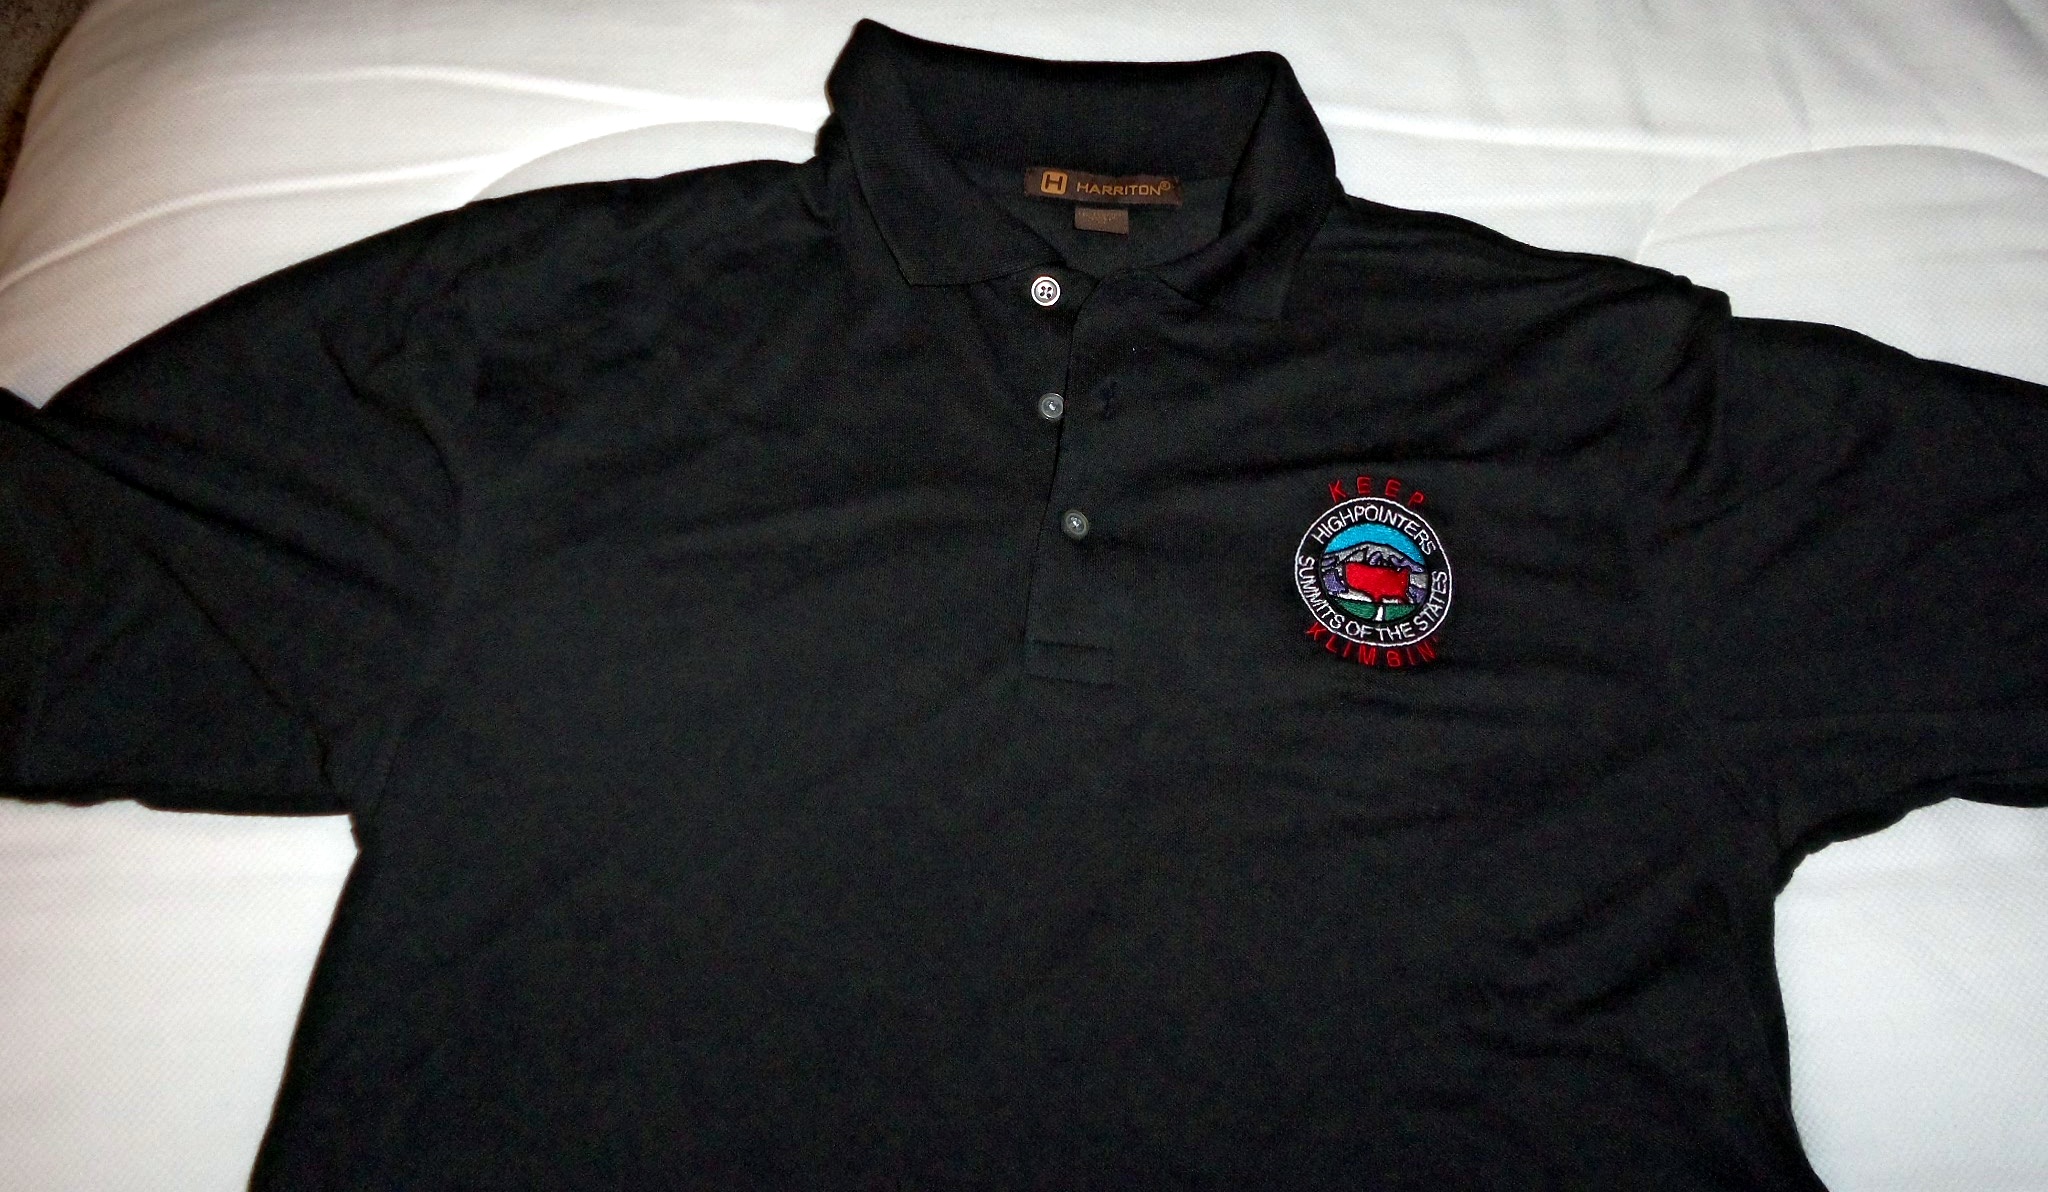 Polo Shirt - Black with small Club logo on Front | Highpointers Club